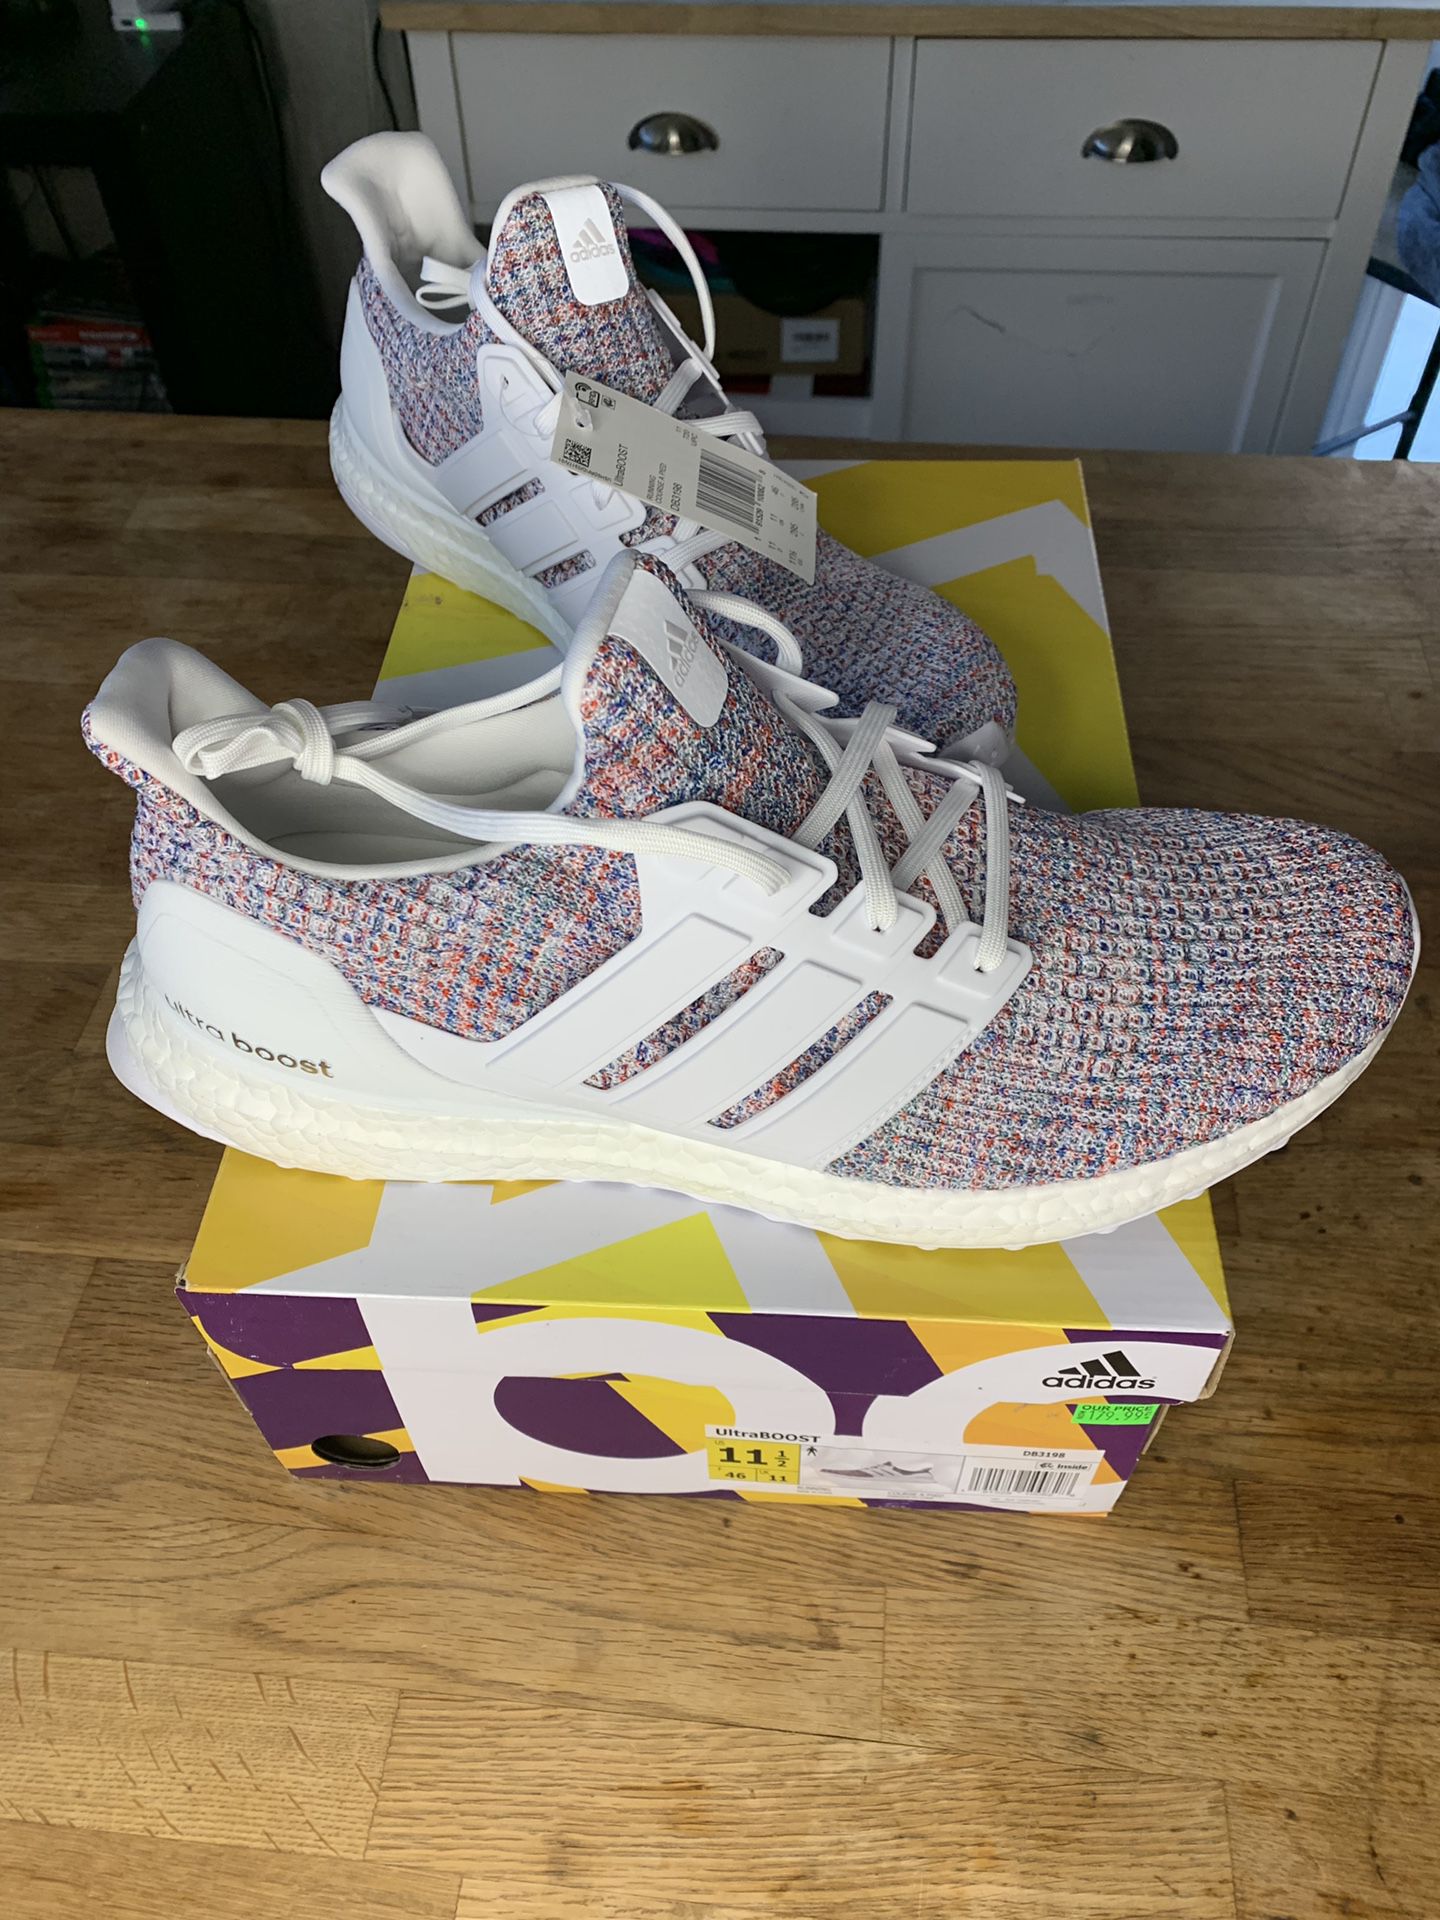 Adidas UltraBoost Running shoes Size 11.5